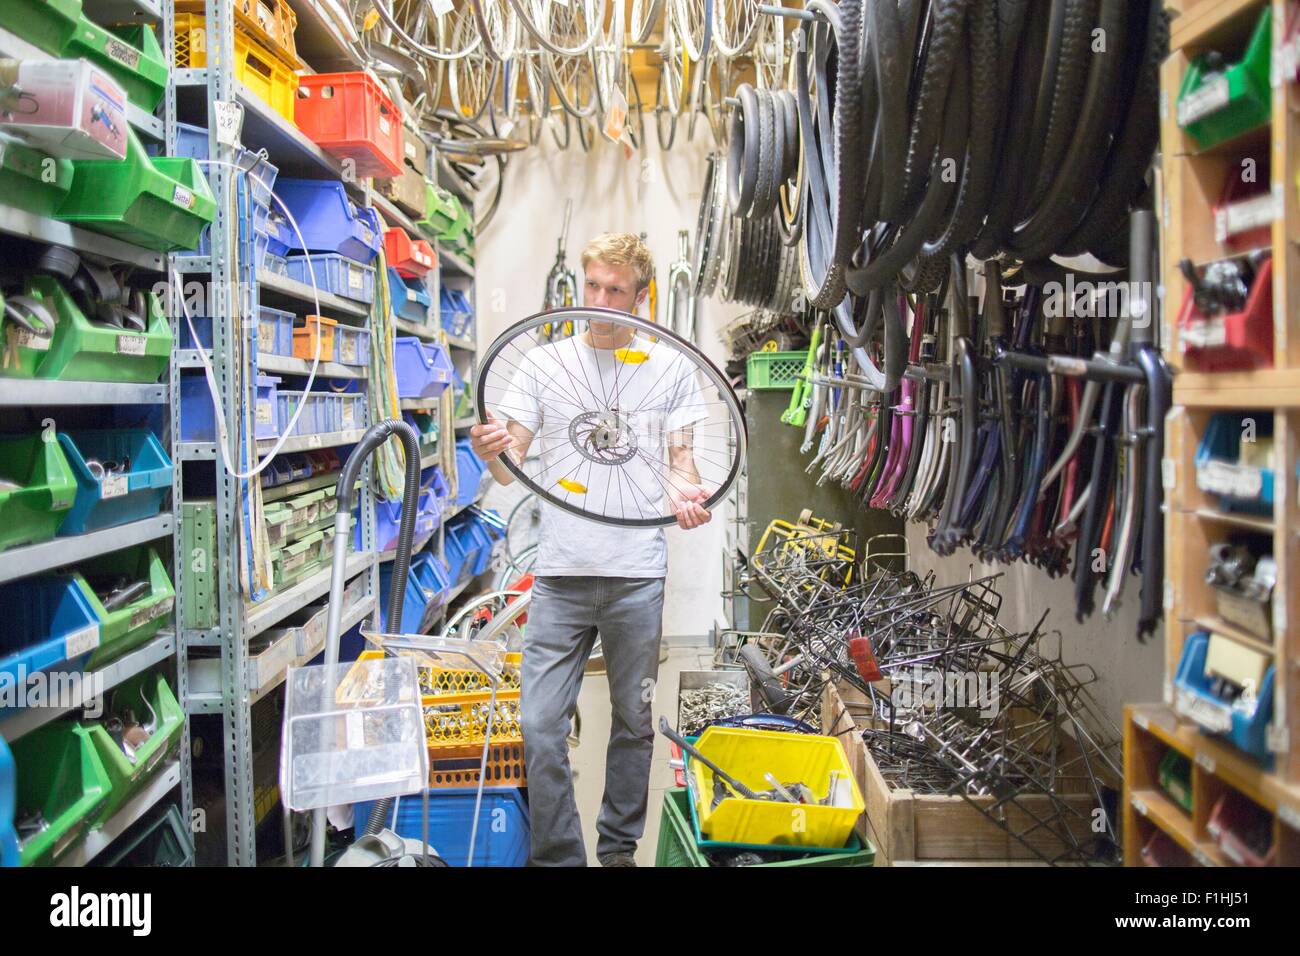 Mid adult man in storage room holding bicycle wheel Stock Photo